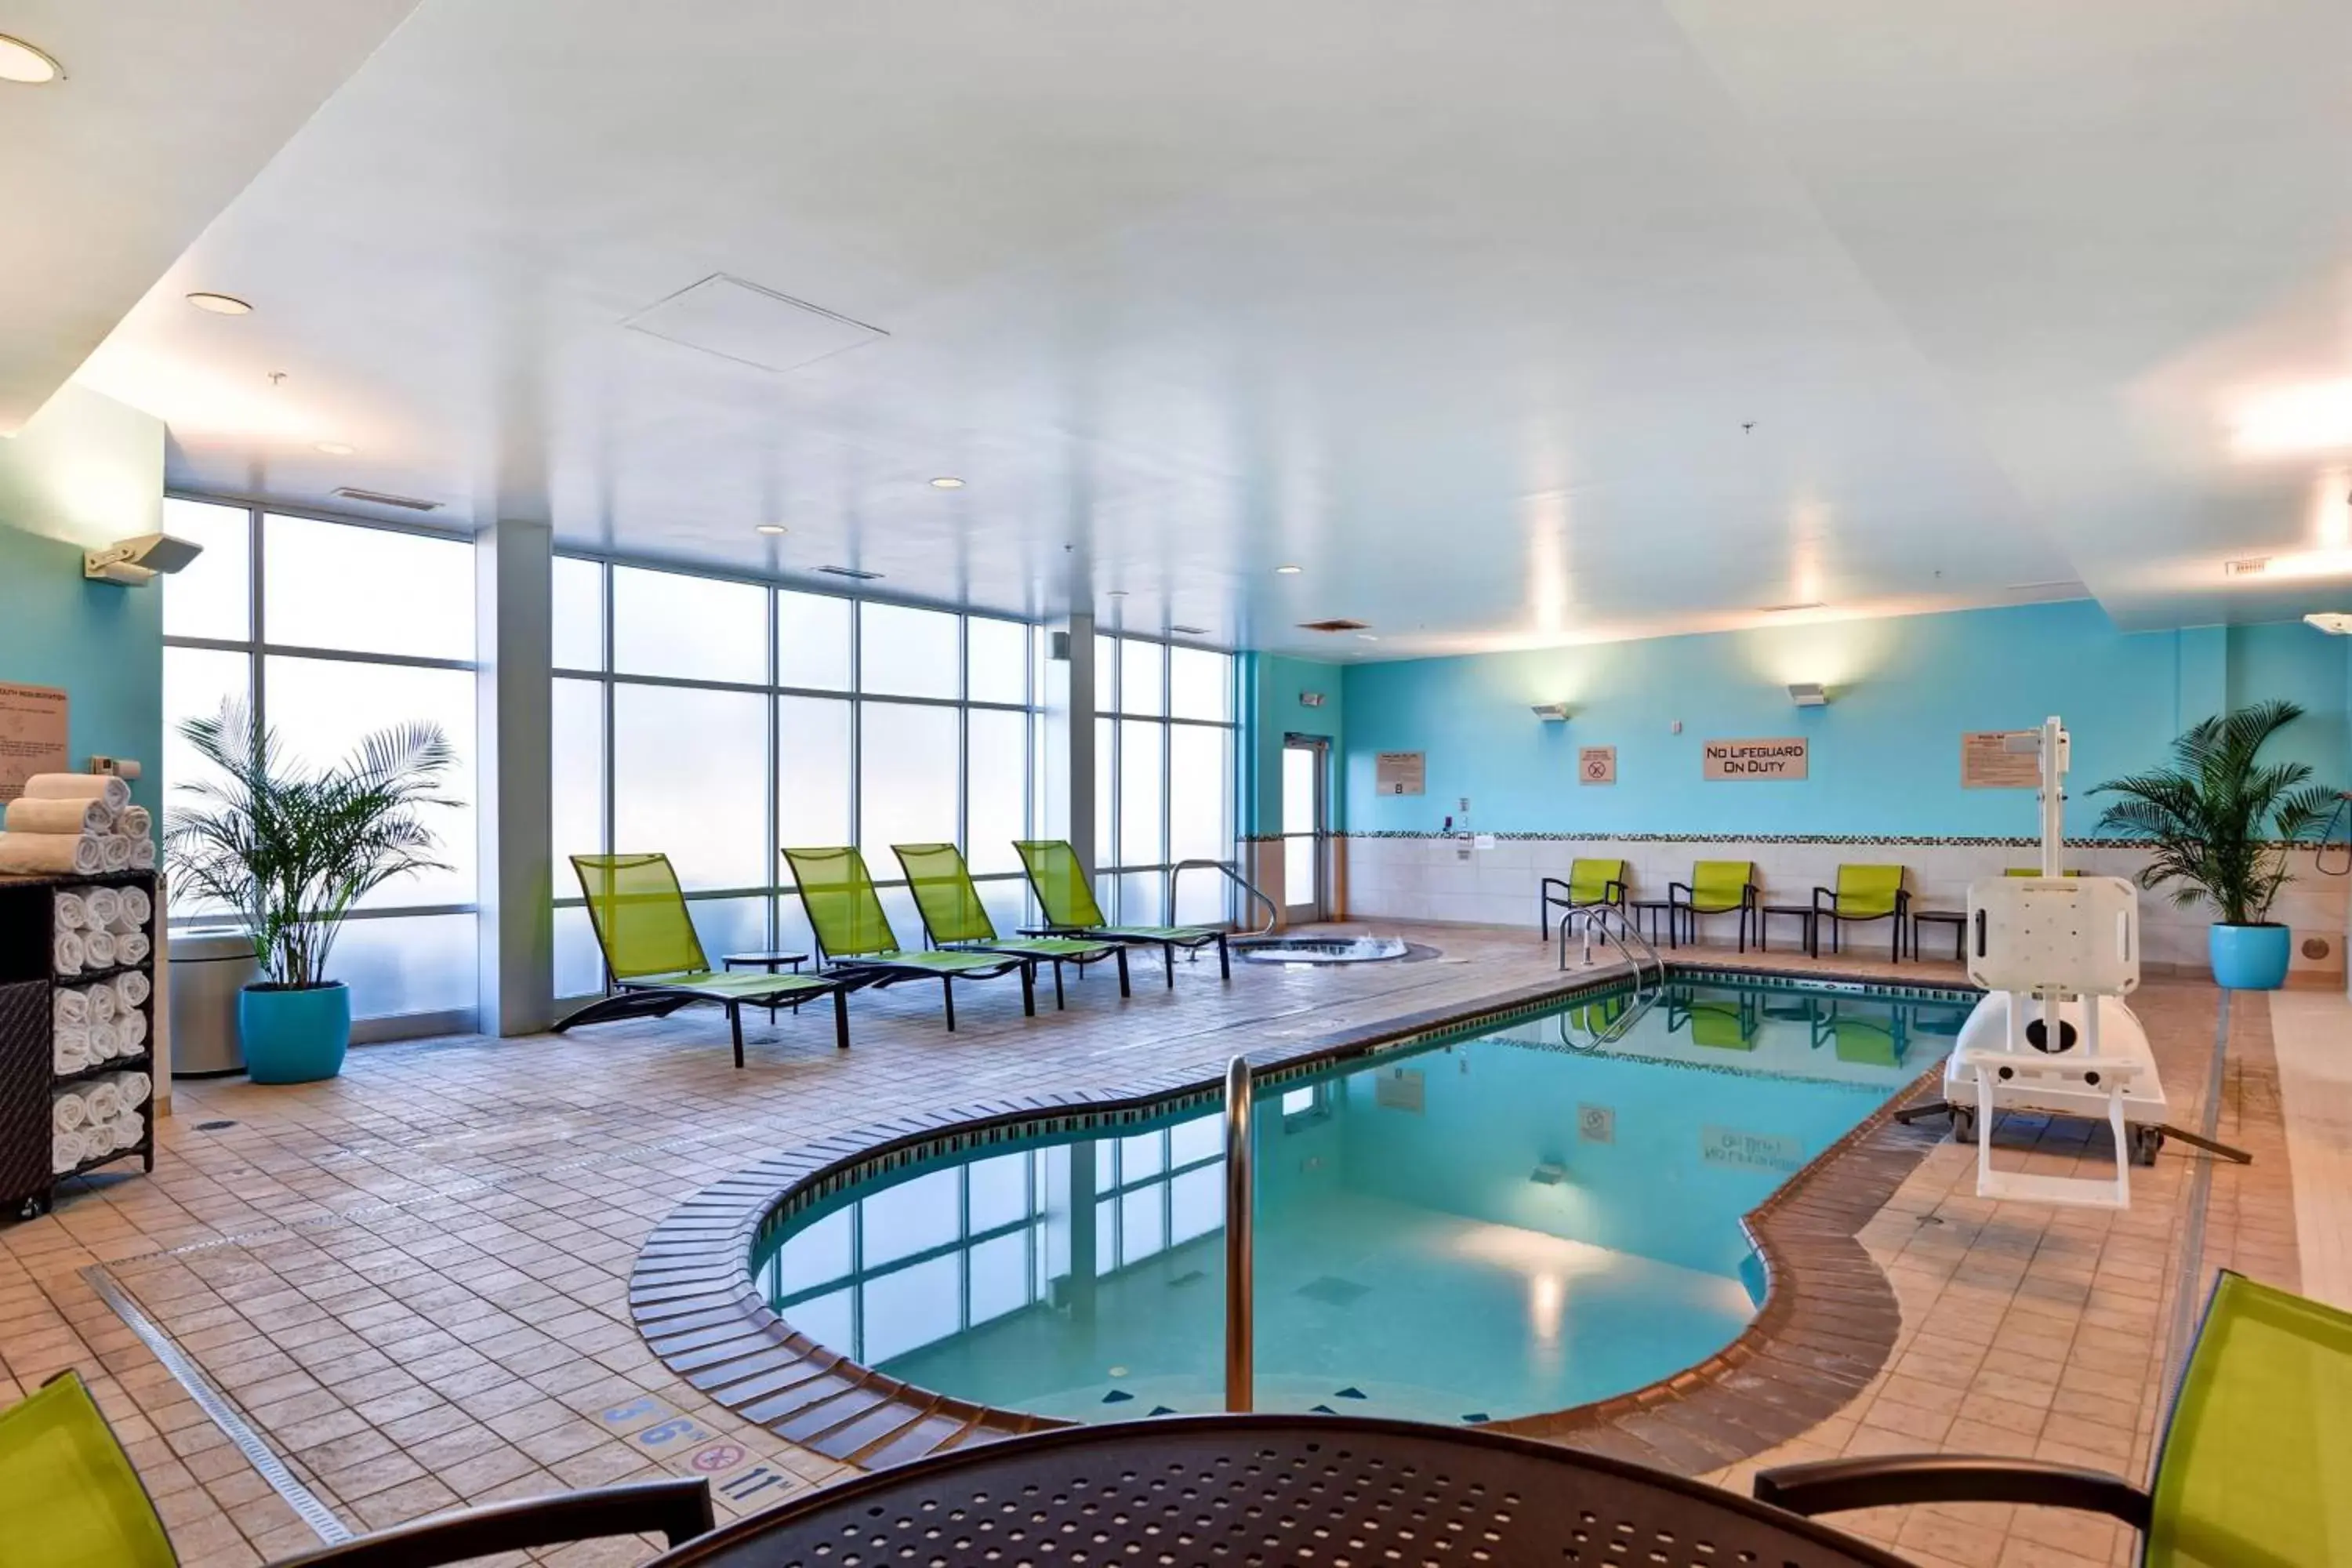 Swimming Pool in SpringHill Suites Denver at Anschutz Medical Campus